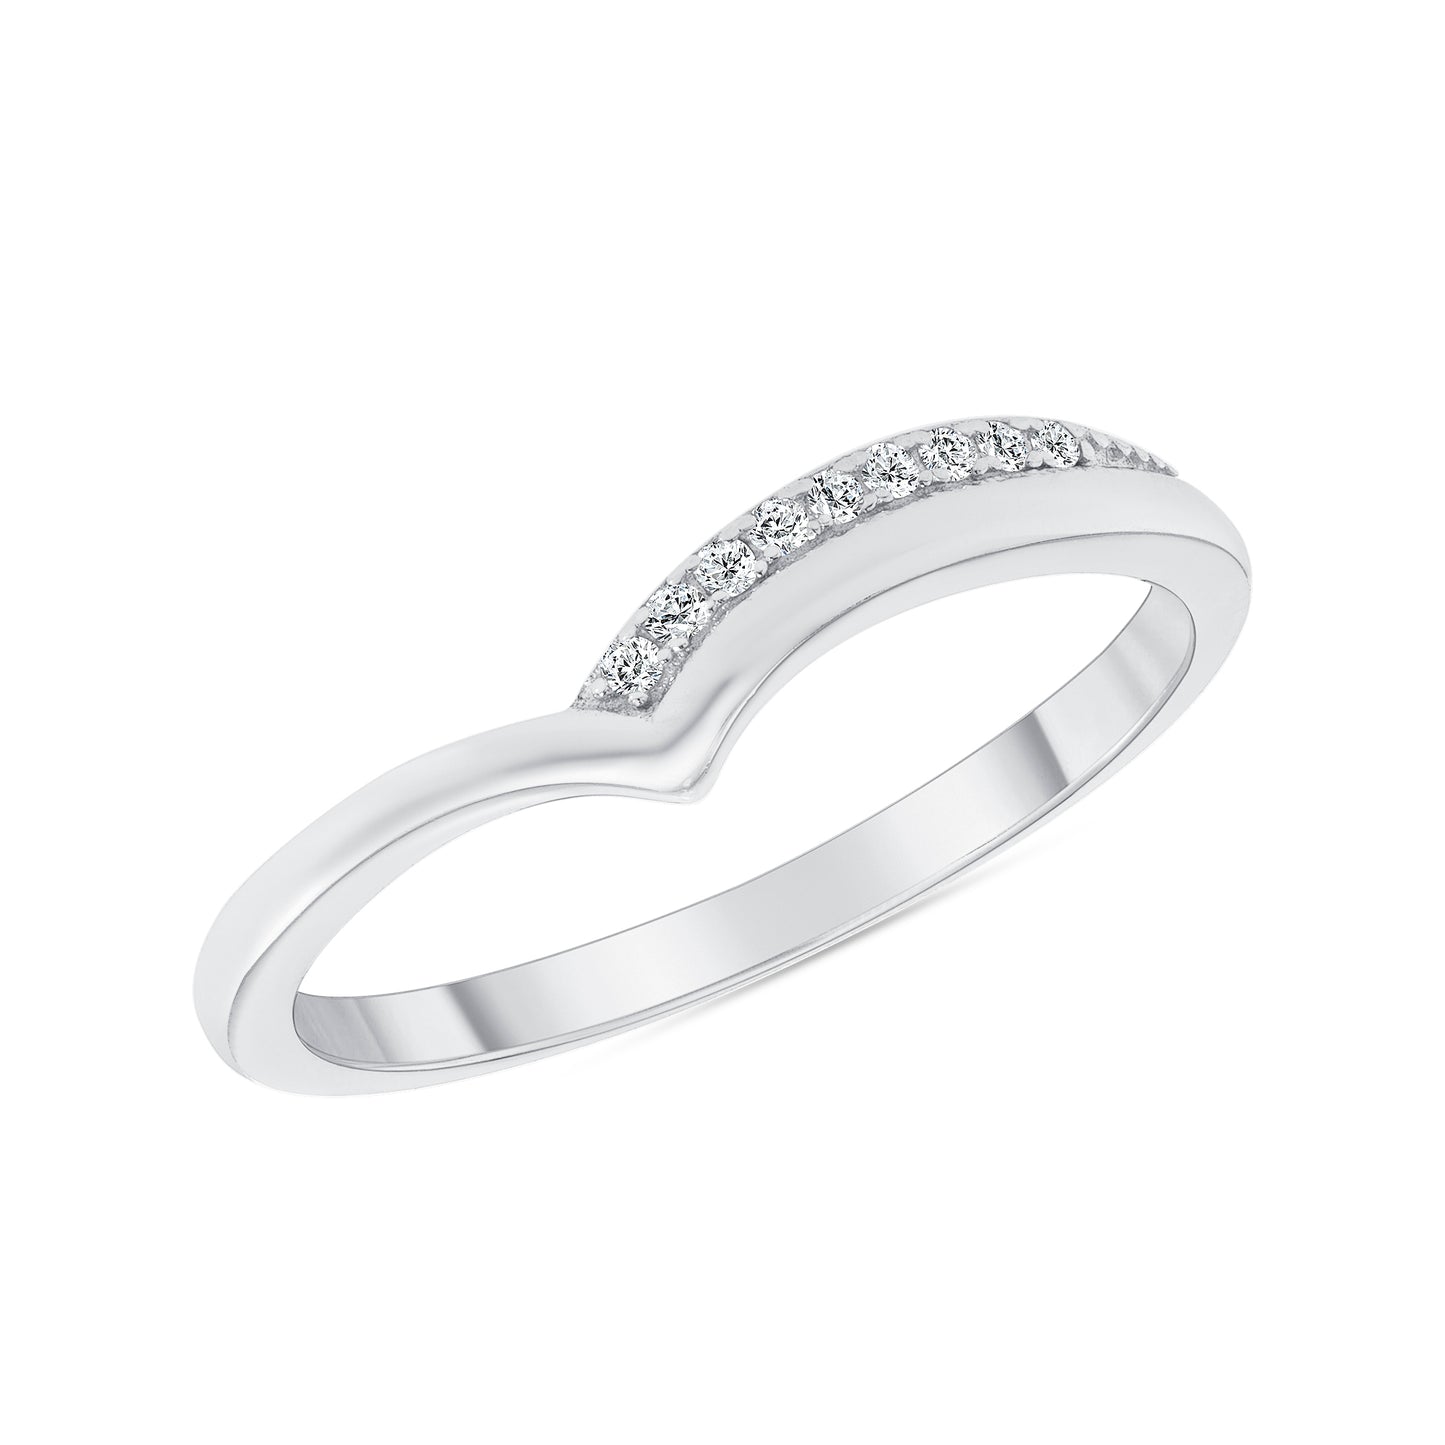 Silver 925 Rhodium Plated V-Shaped Ring. CR00476